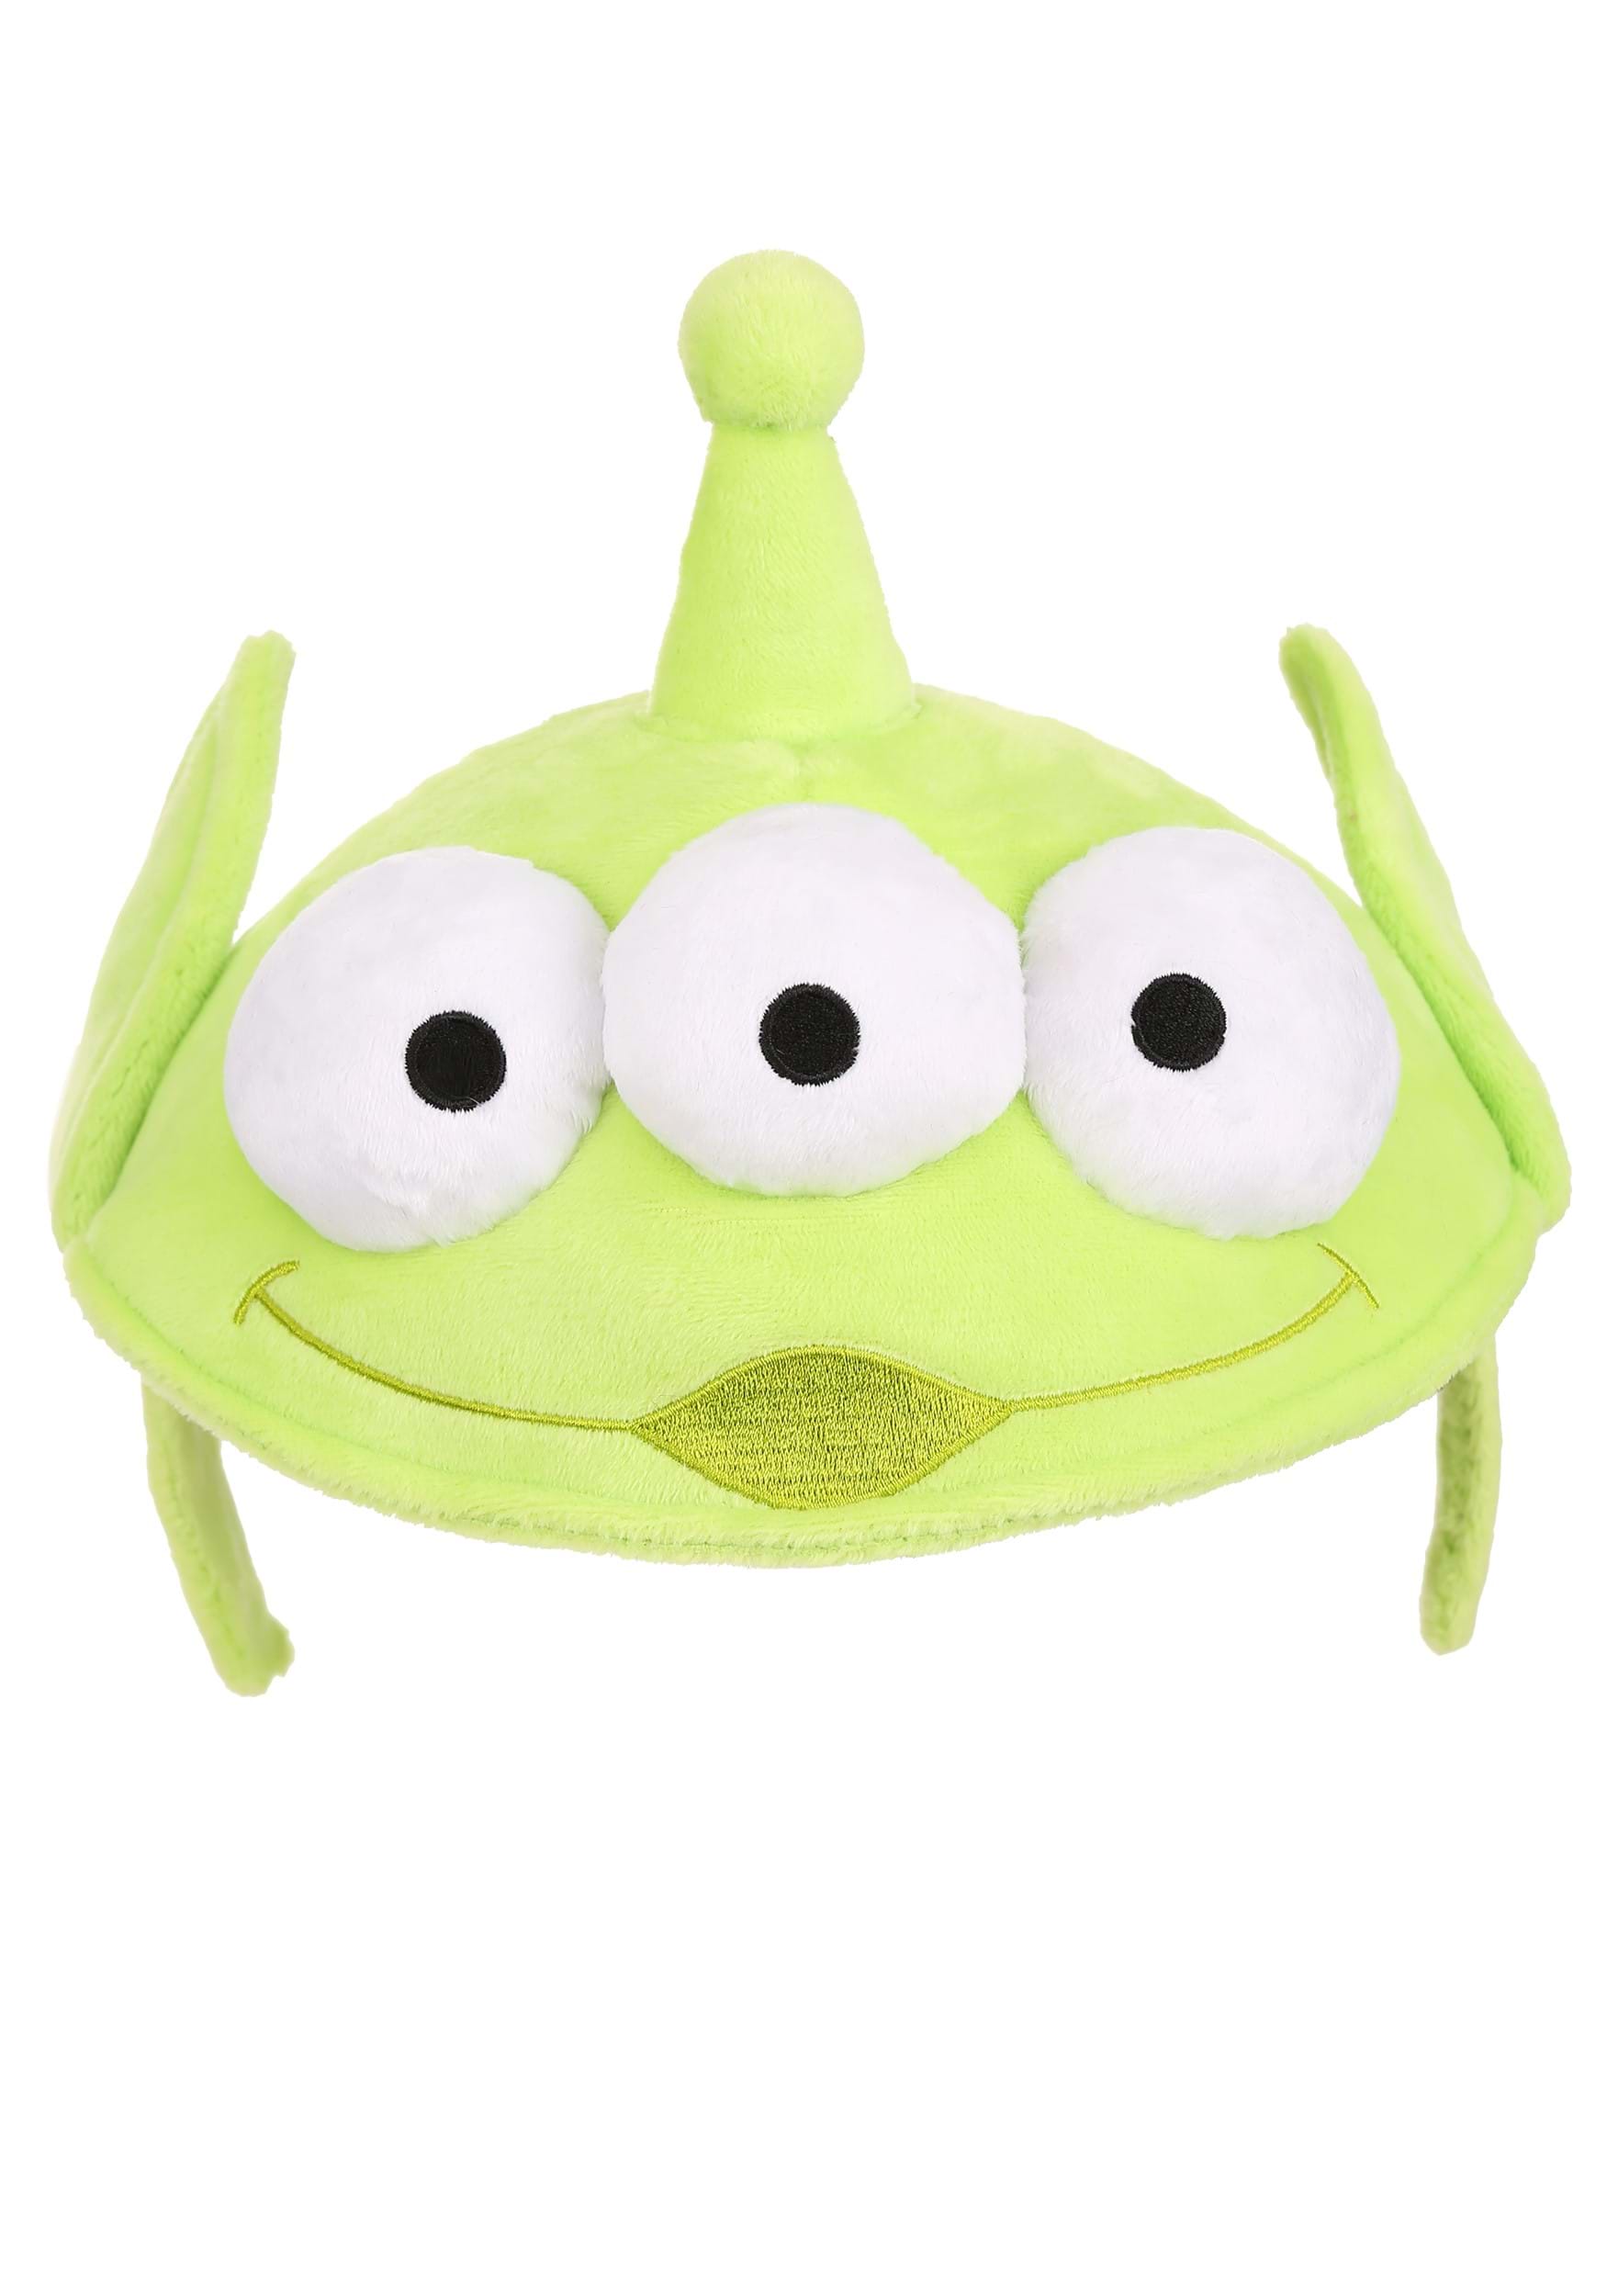 download toy story alien plushie